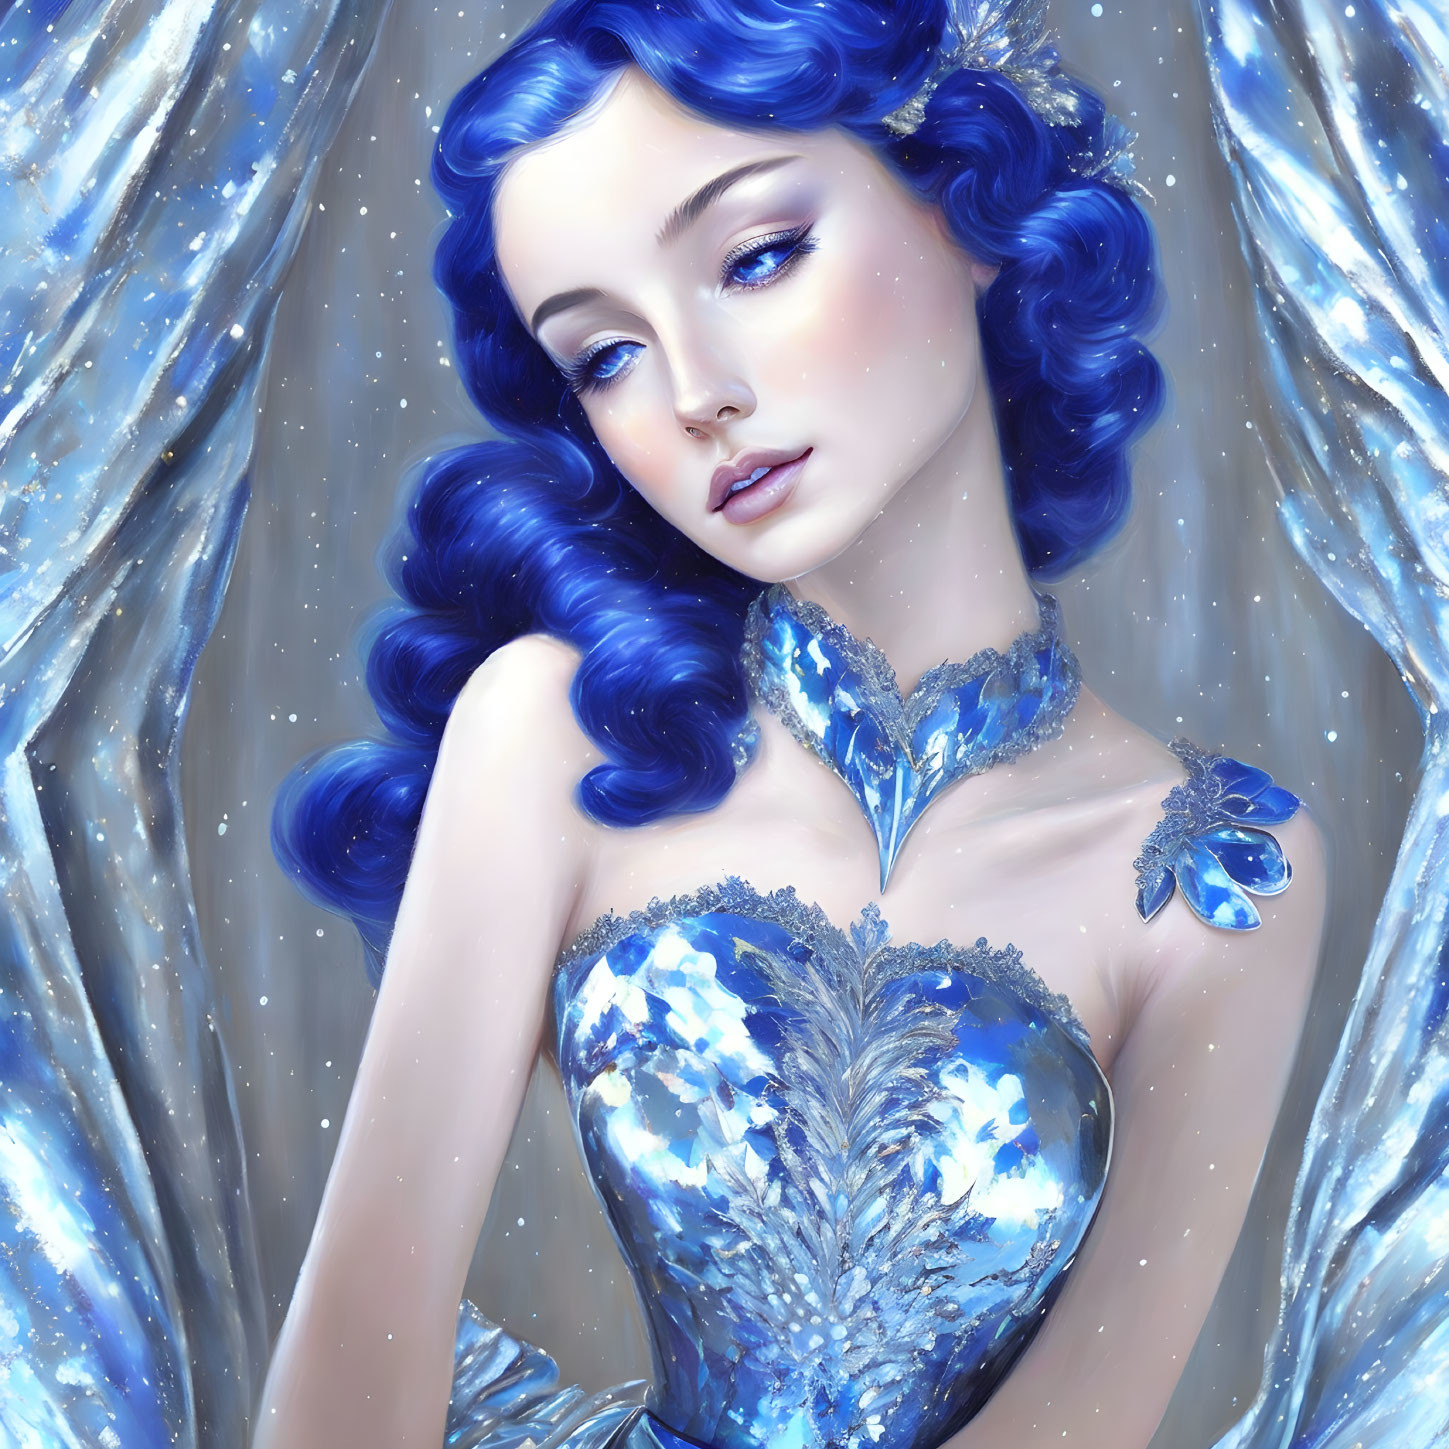 Vibrant Blue Hair Woman in Ice-themed Dress with Crystal Surroundings